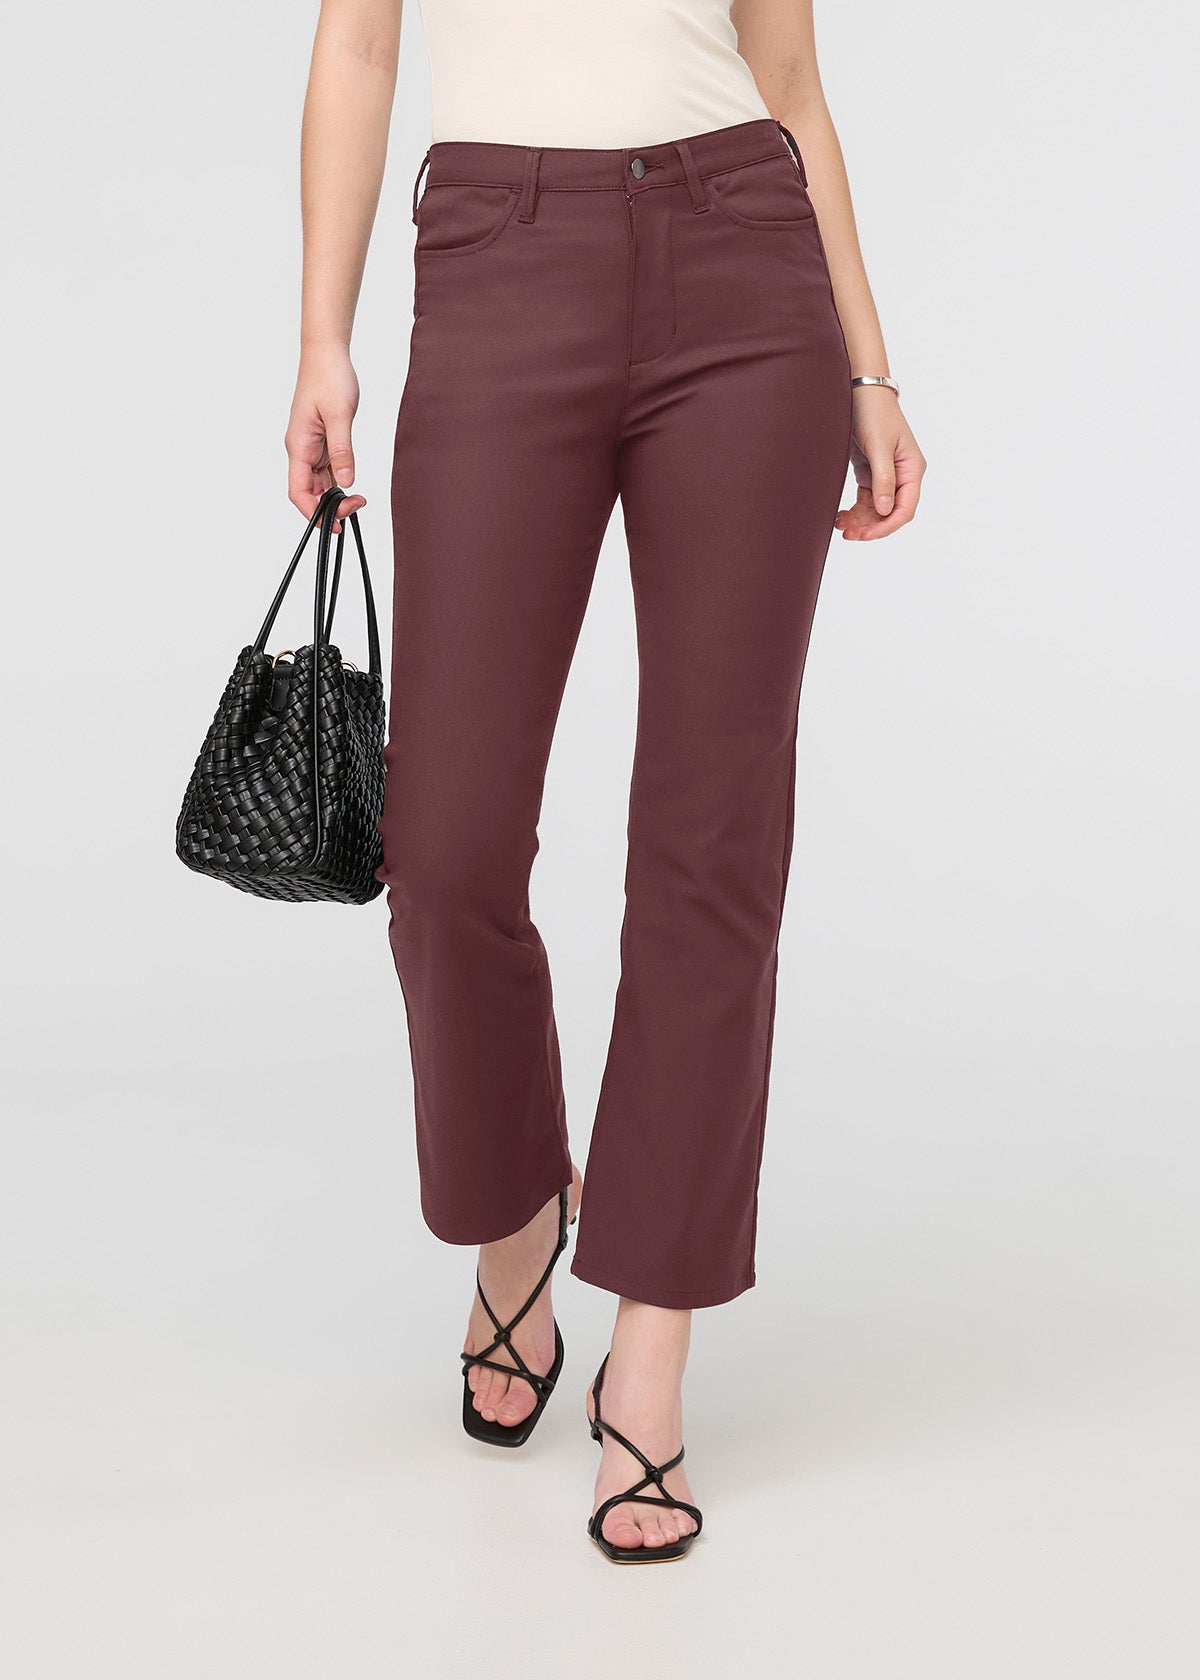 Ladies Cropped Trousers Rich Cotton Elasticated Zip Pockets Women